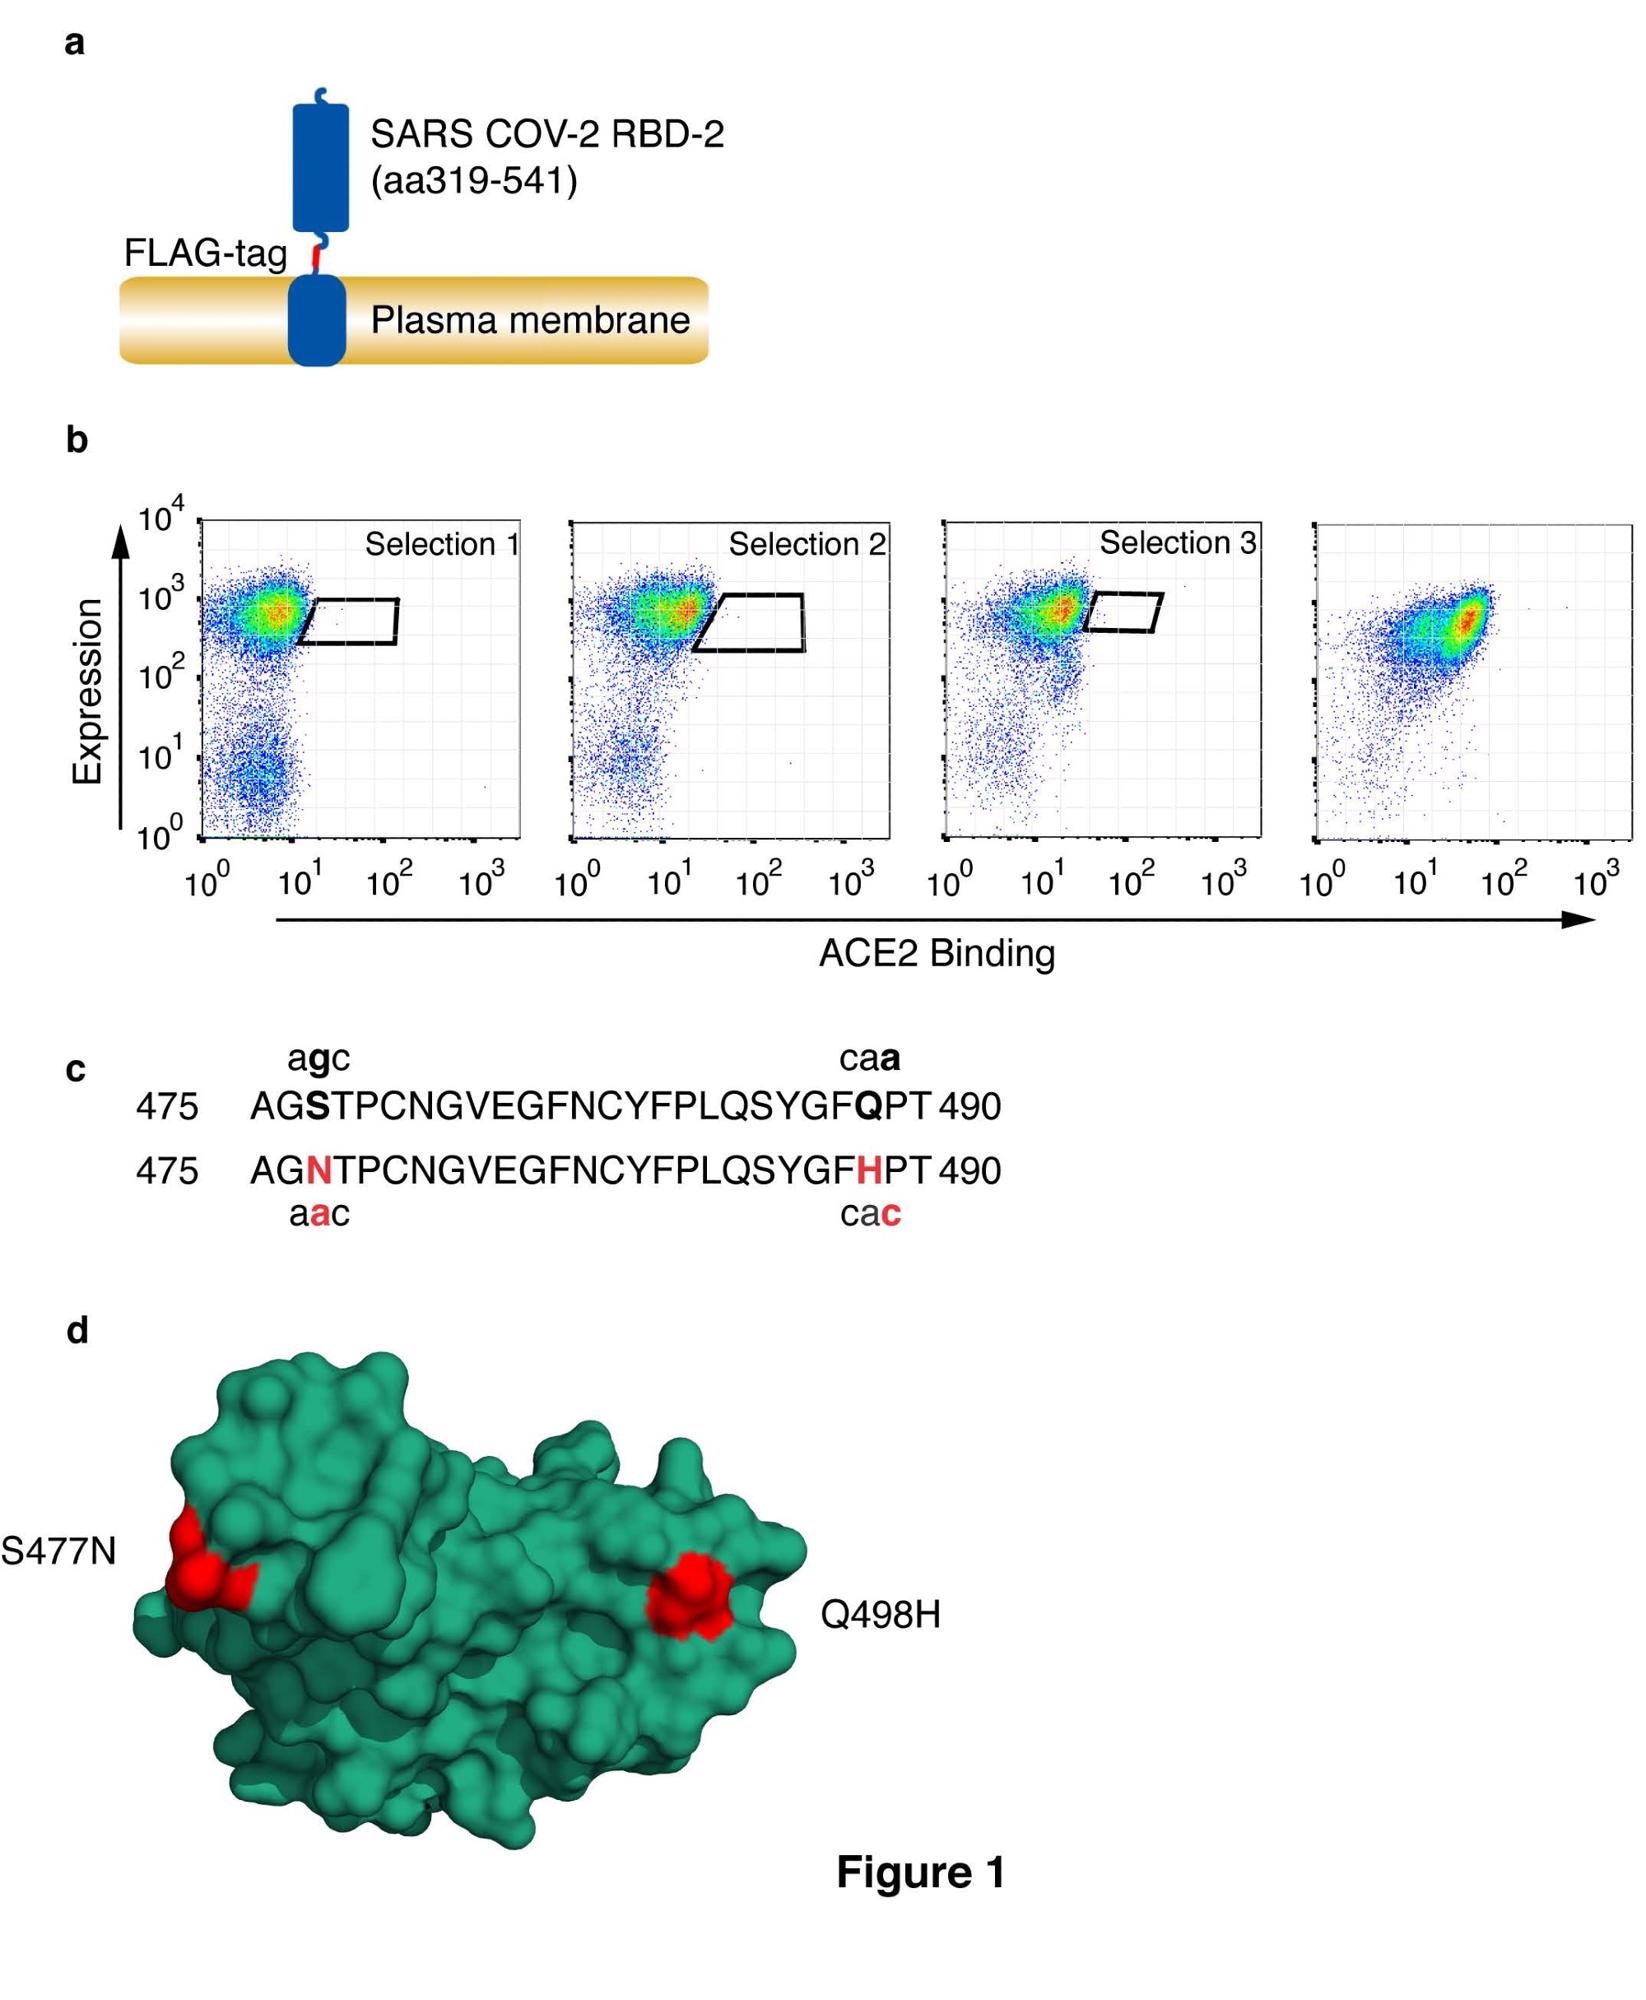 Selection of CoV-2 receptor binding domain with high affinity for HuACE2. (a) Schematic representation of cell surface-expressed CoV-2 RBD showing RBD, FLAG-epitope tag, and PDGF-receptor transmembrane anchor. (b) CoV-2 RBD was selected for enhanced ACE2 binding by somatic hypermutation and cell surface display in DT40 cells. FACS plots are shown of DT40 cells following binding of H6-tagged-HuACE2. Bound ACE2 was detected with anti-Histidine6-PE and the expression level of RBD was assessed with ant-FLAG-APC. Sort windows are indicated for each round of selection and diversification, selecting at each round for the highest Ang2 binding. Selections were performed at 0.1nM ACE2. The final panel shows a binding plot of the selected cells. (c) Amino acid substitutions S477N and Q498H in the selected RBD are shown, along with the corresponding single-nucleotide mutations. Substituted residues and nucleotides are in red. (d) Position of residue substitutions in the selected RBD. Substituted residues are shown in red on the ACE2 binding interface (PDB accession number 6M0J, 20). The RBD is orientated to show the face that interacts directly with ACE2.